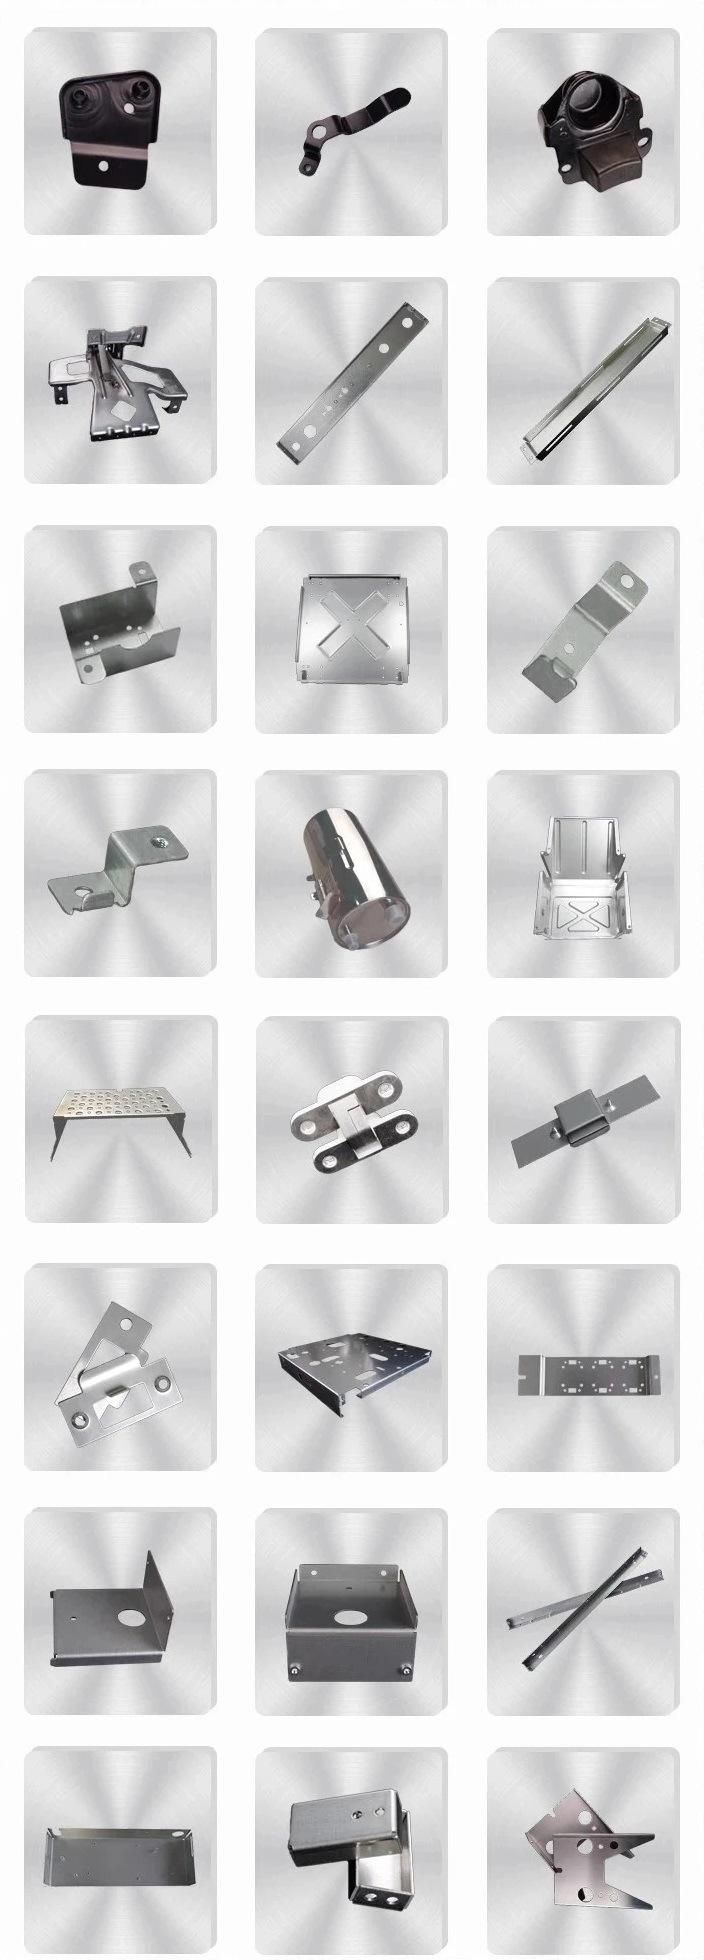 Stainless Steel Machining Part and Precision Steel Casting